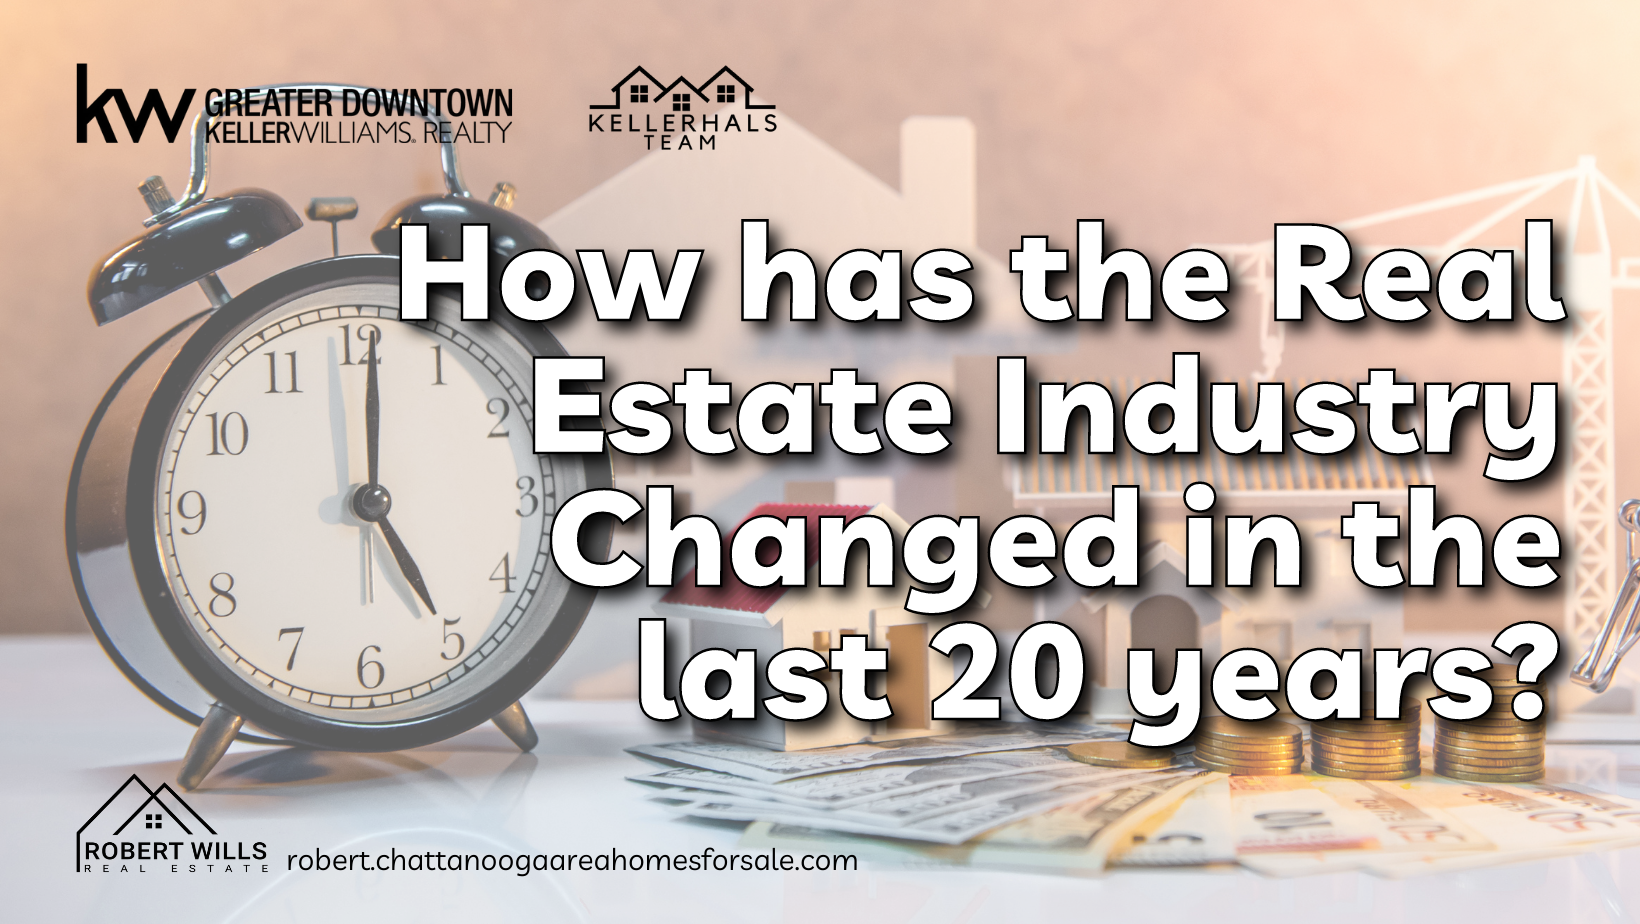 How has the Real Estate Industry Changed in the last 20 years?